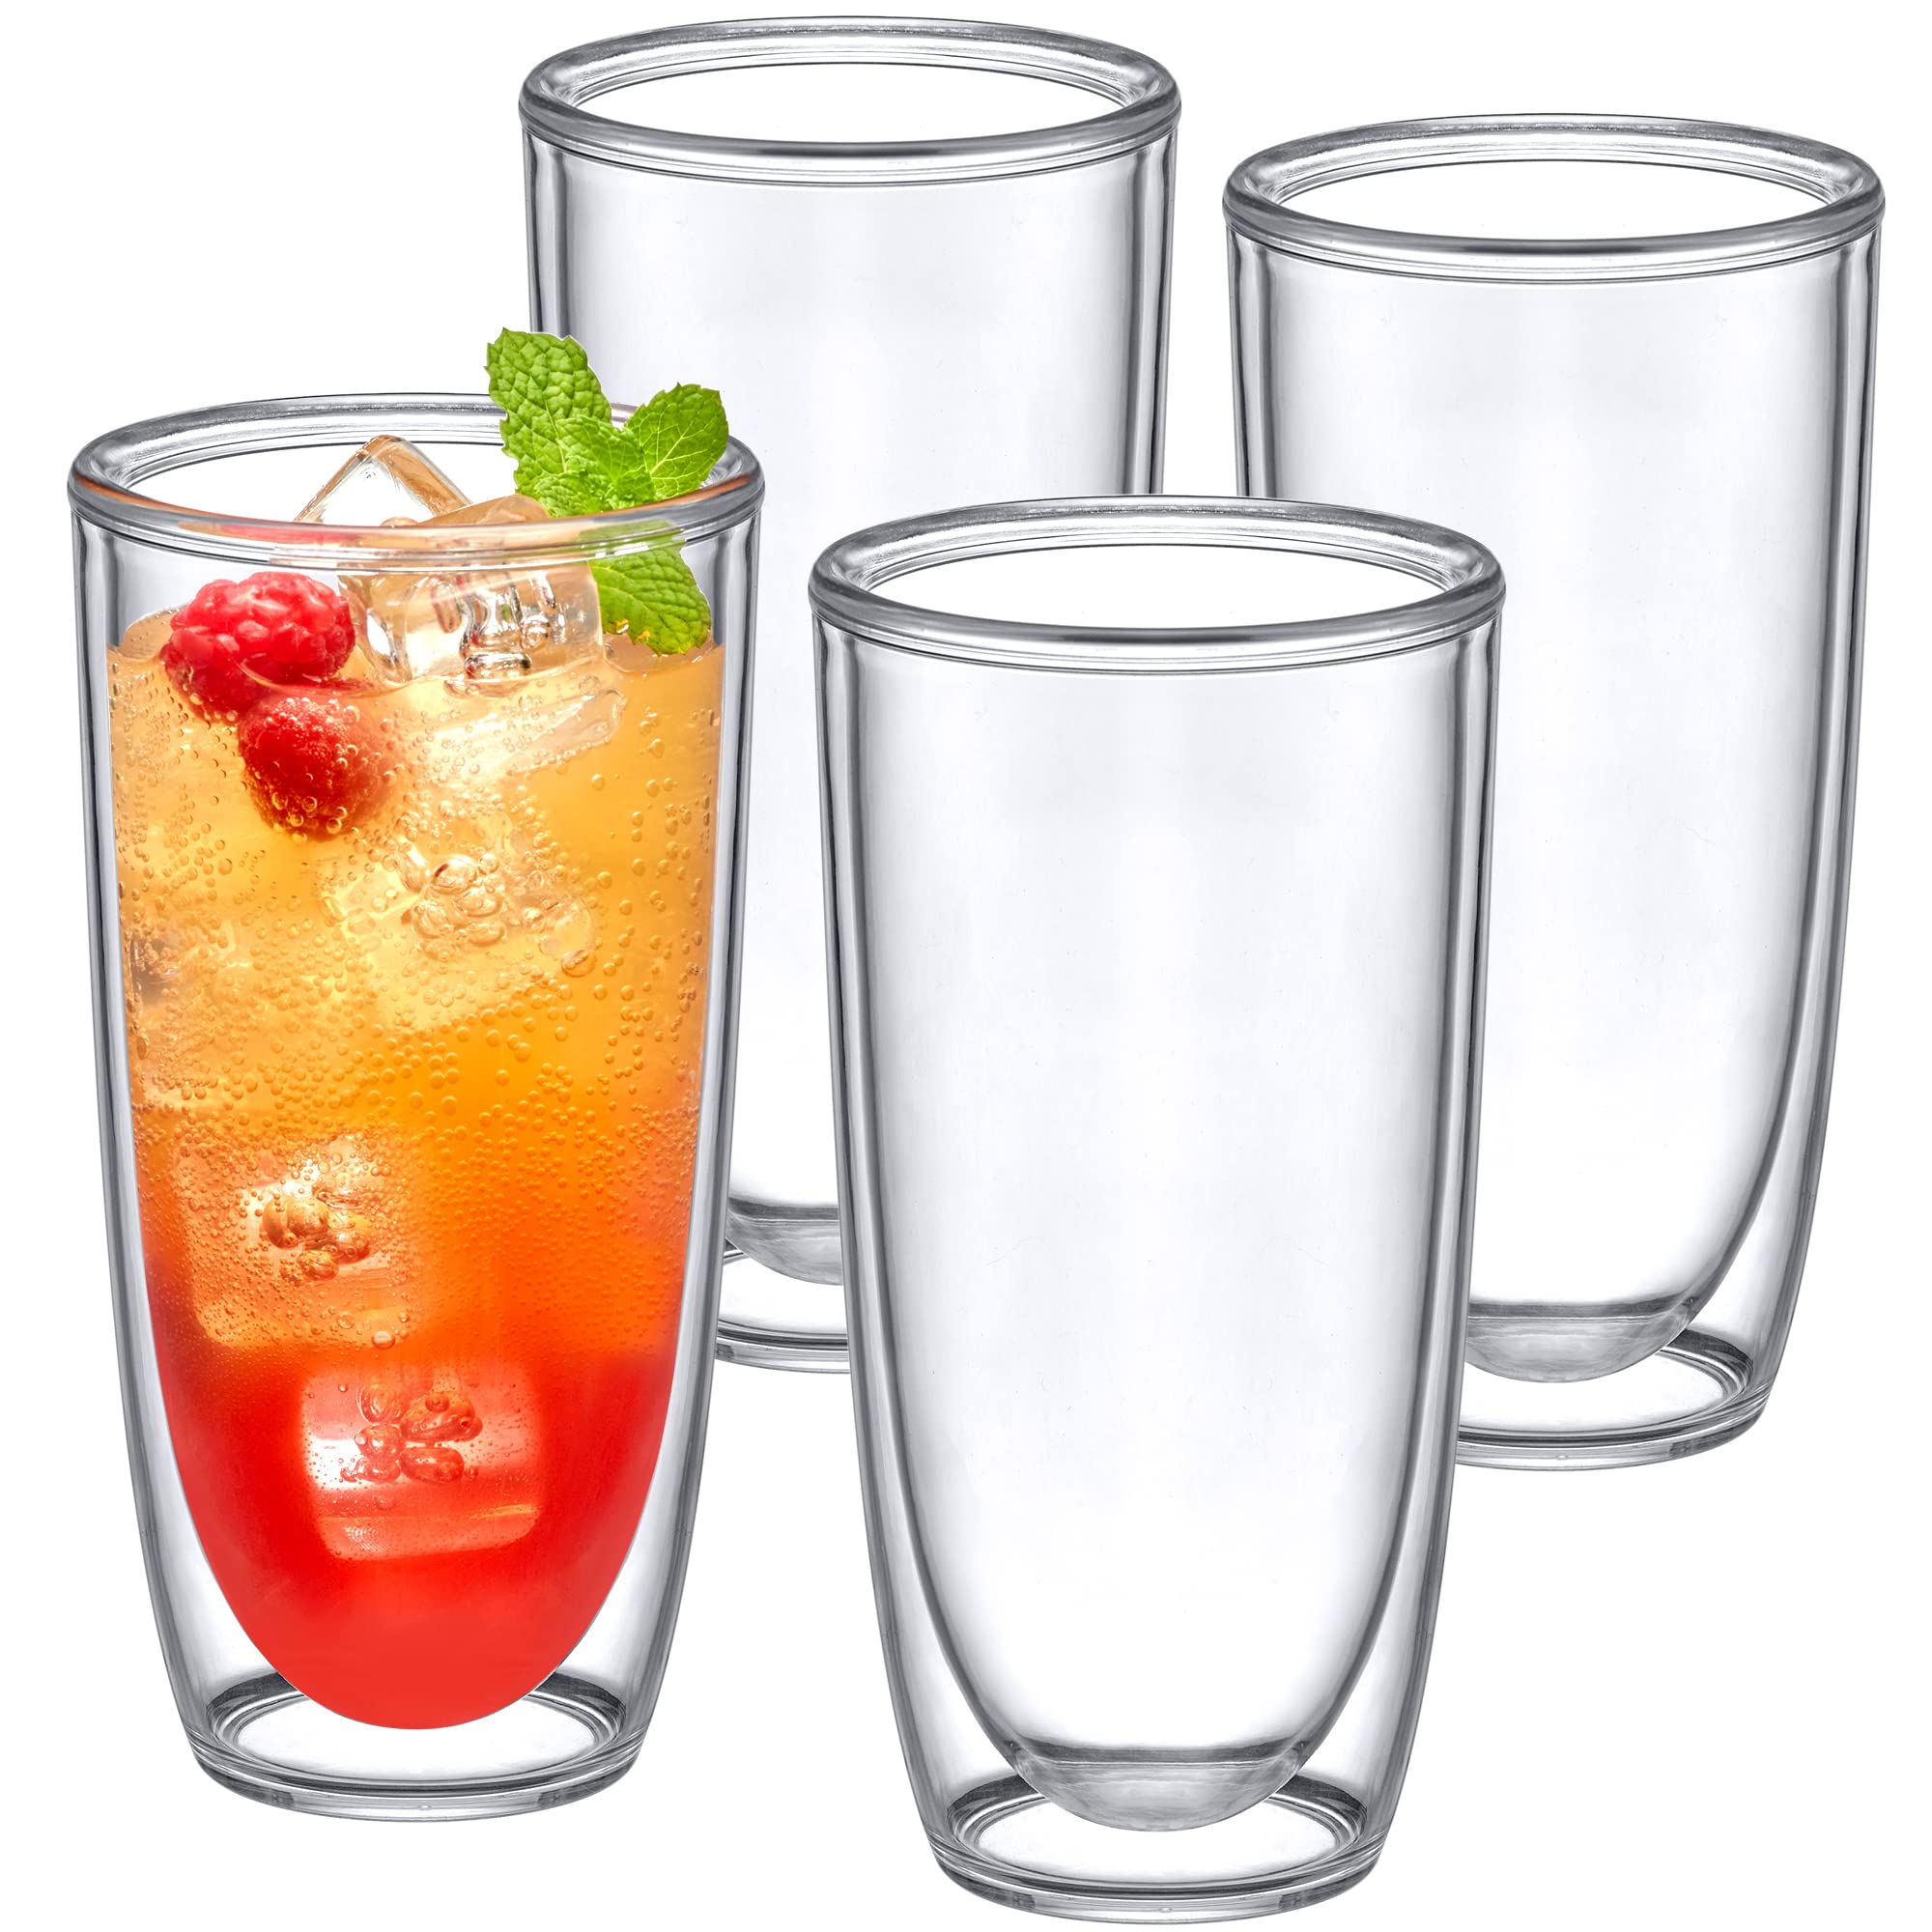 Amazing Abby - Andes - 20-Ounce Insulated Plastic Tumblers (Set of 4), Double-Wall Plastic Drinking Glasses, All-Clear High-Ball